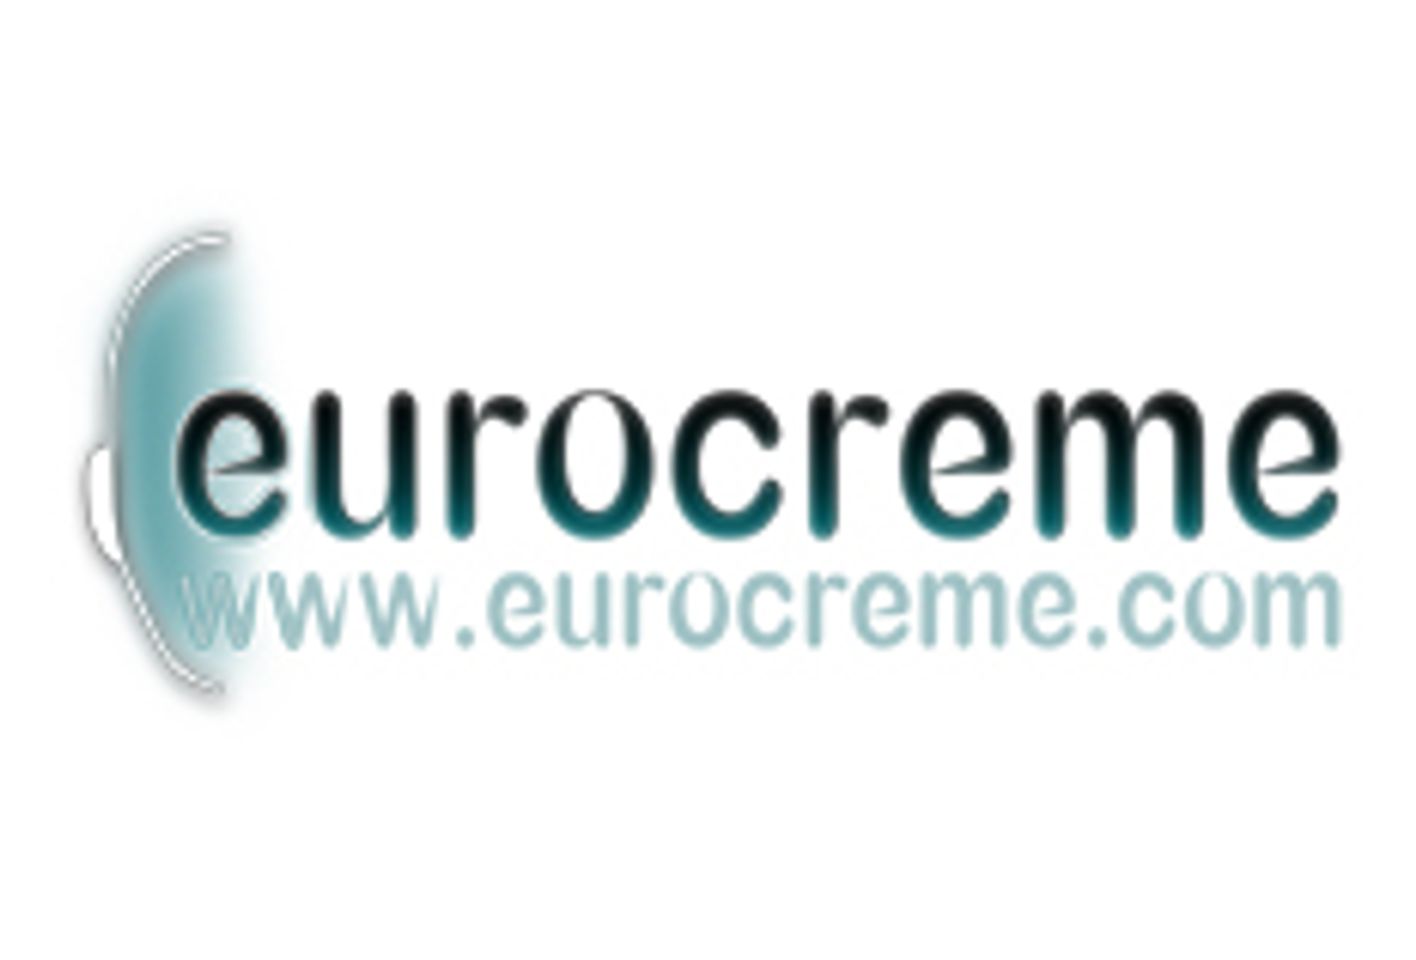 New Eurocreme.com Officially Launches Today